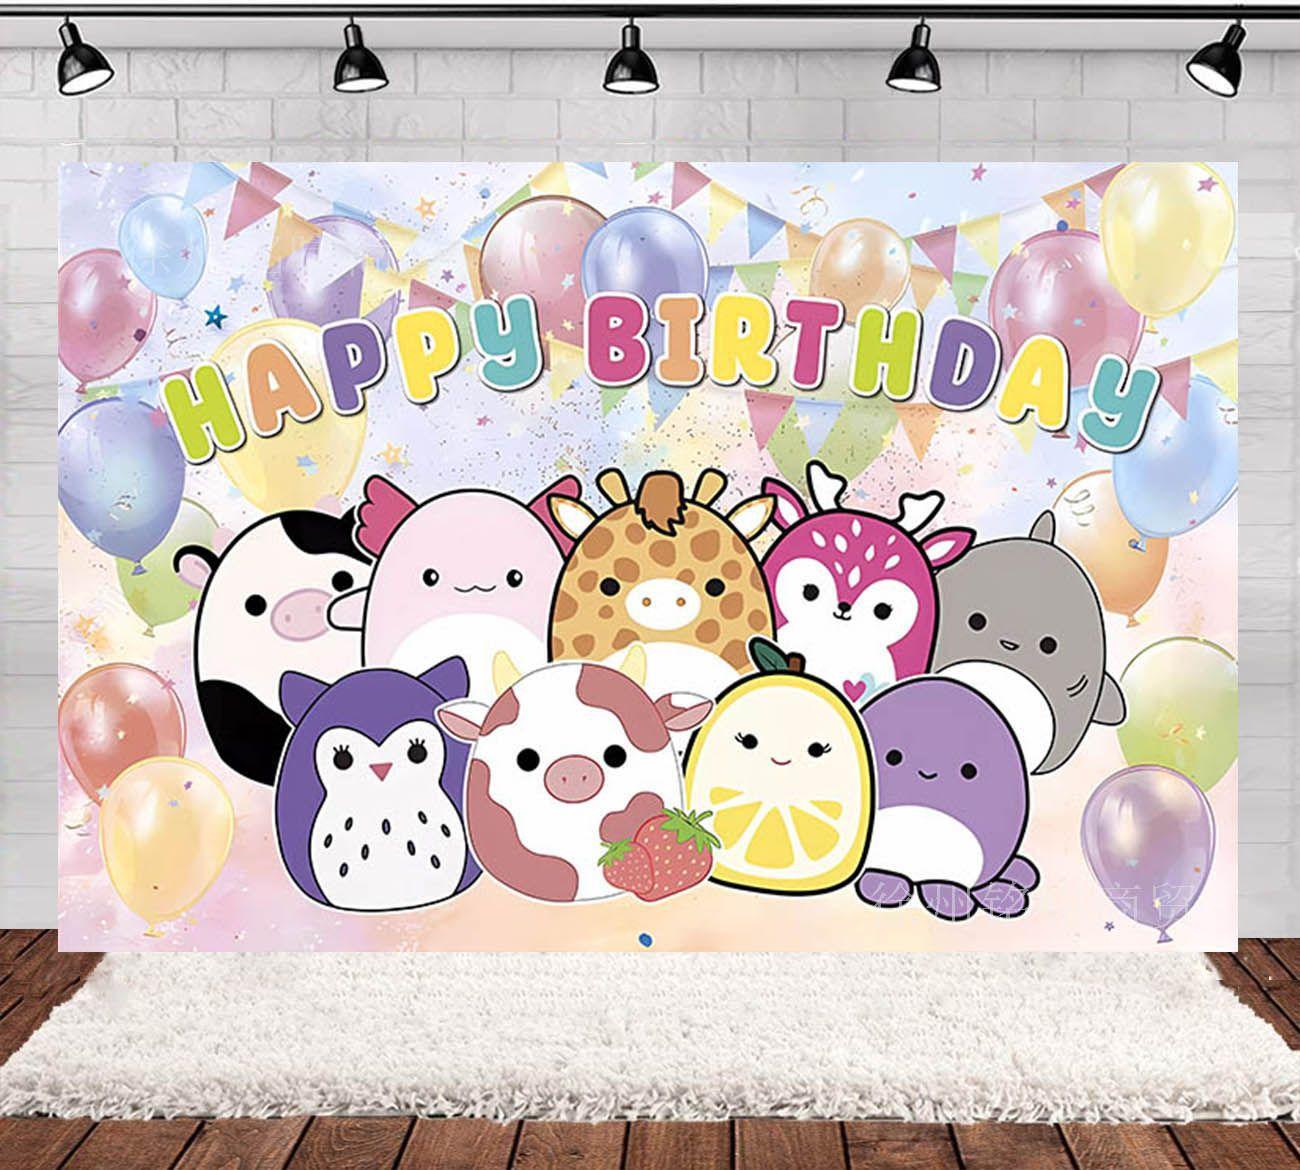 Squishmallows Birthday Party Decorations.